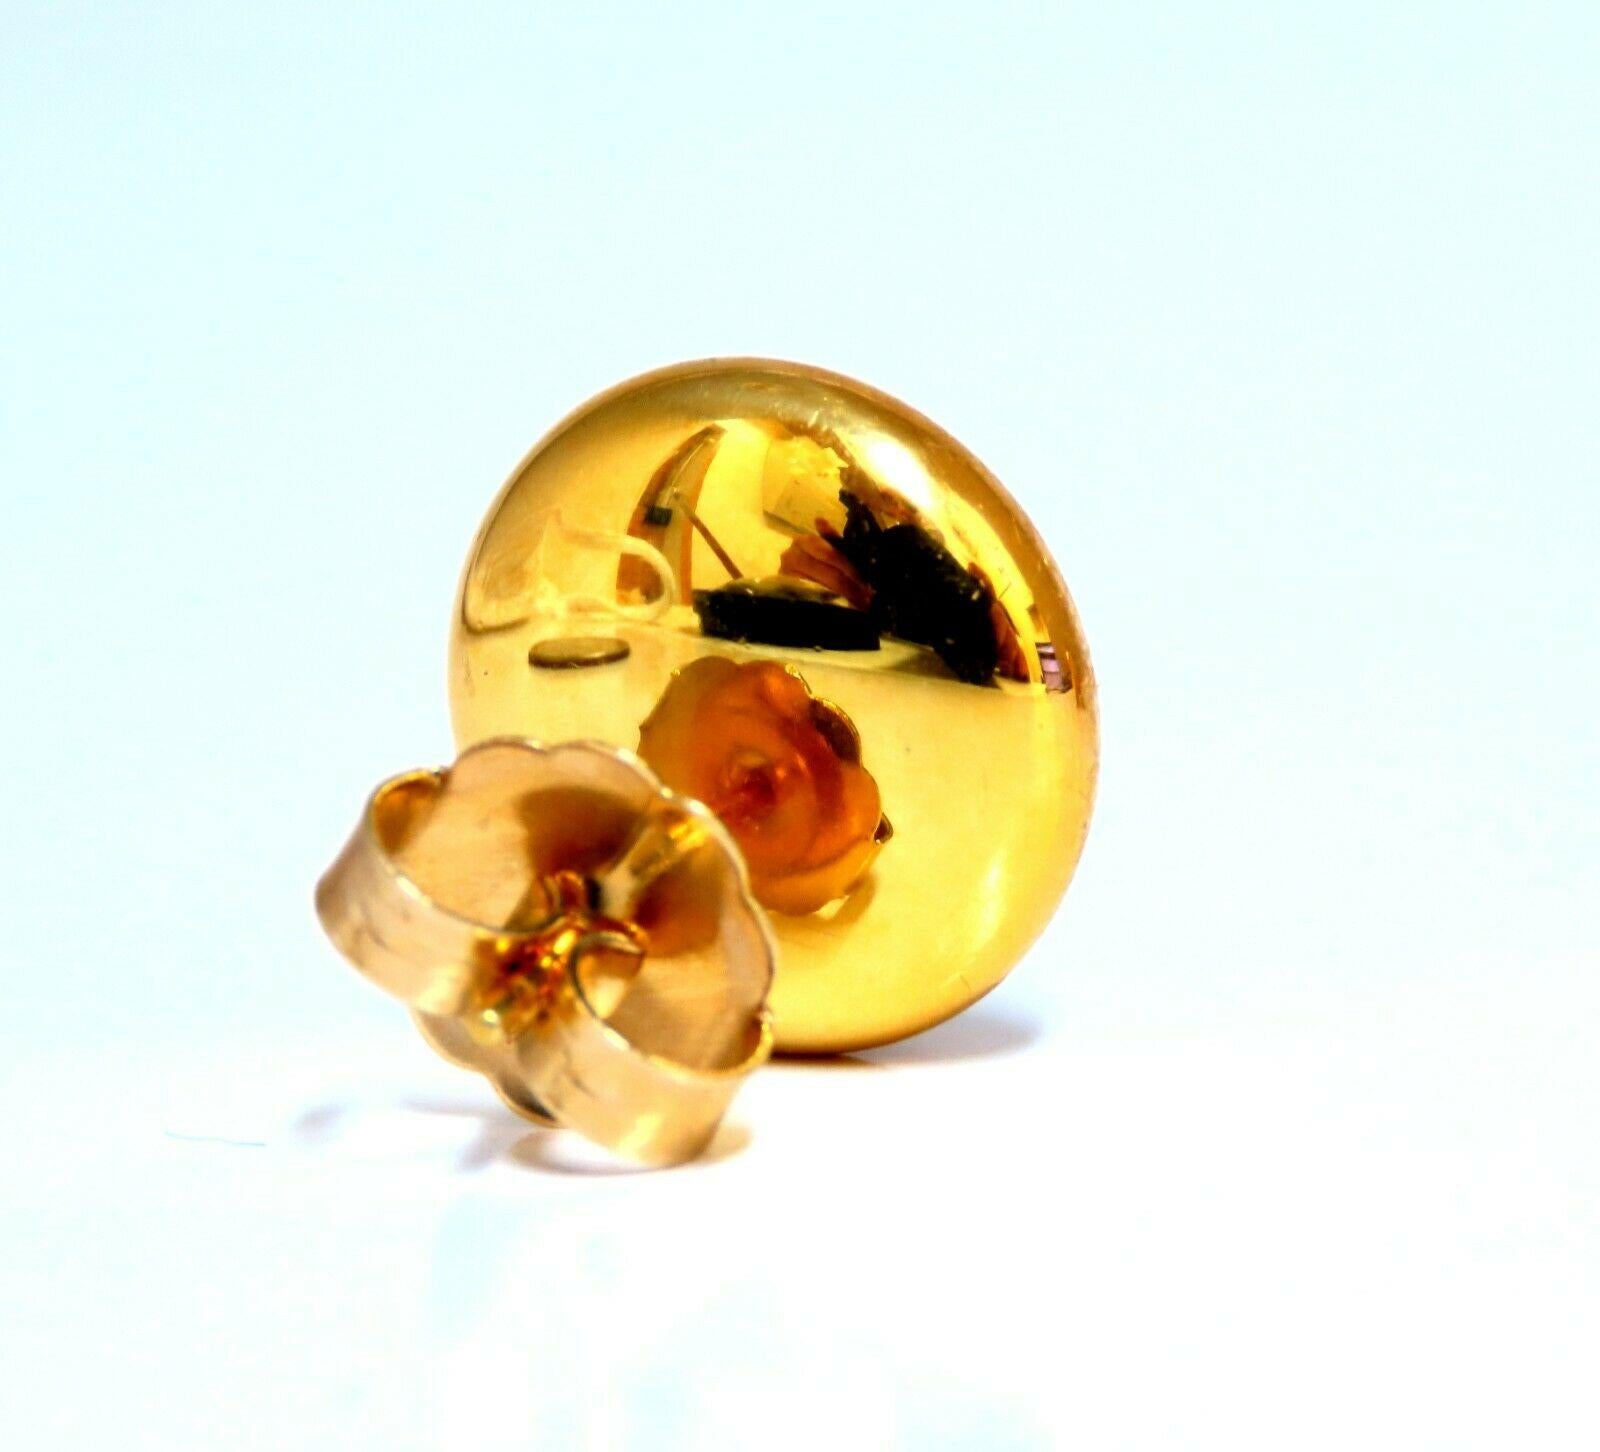 Button Stud Earrings

Measurements of Earrings:

15.4mm wide

3.9 grams / 14kt. yellow gold

Earrings are gorgeous made